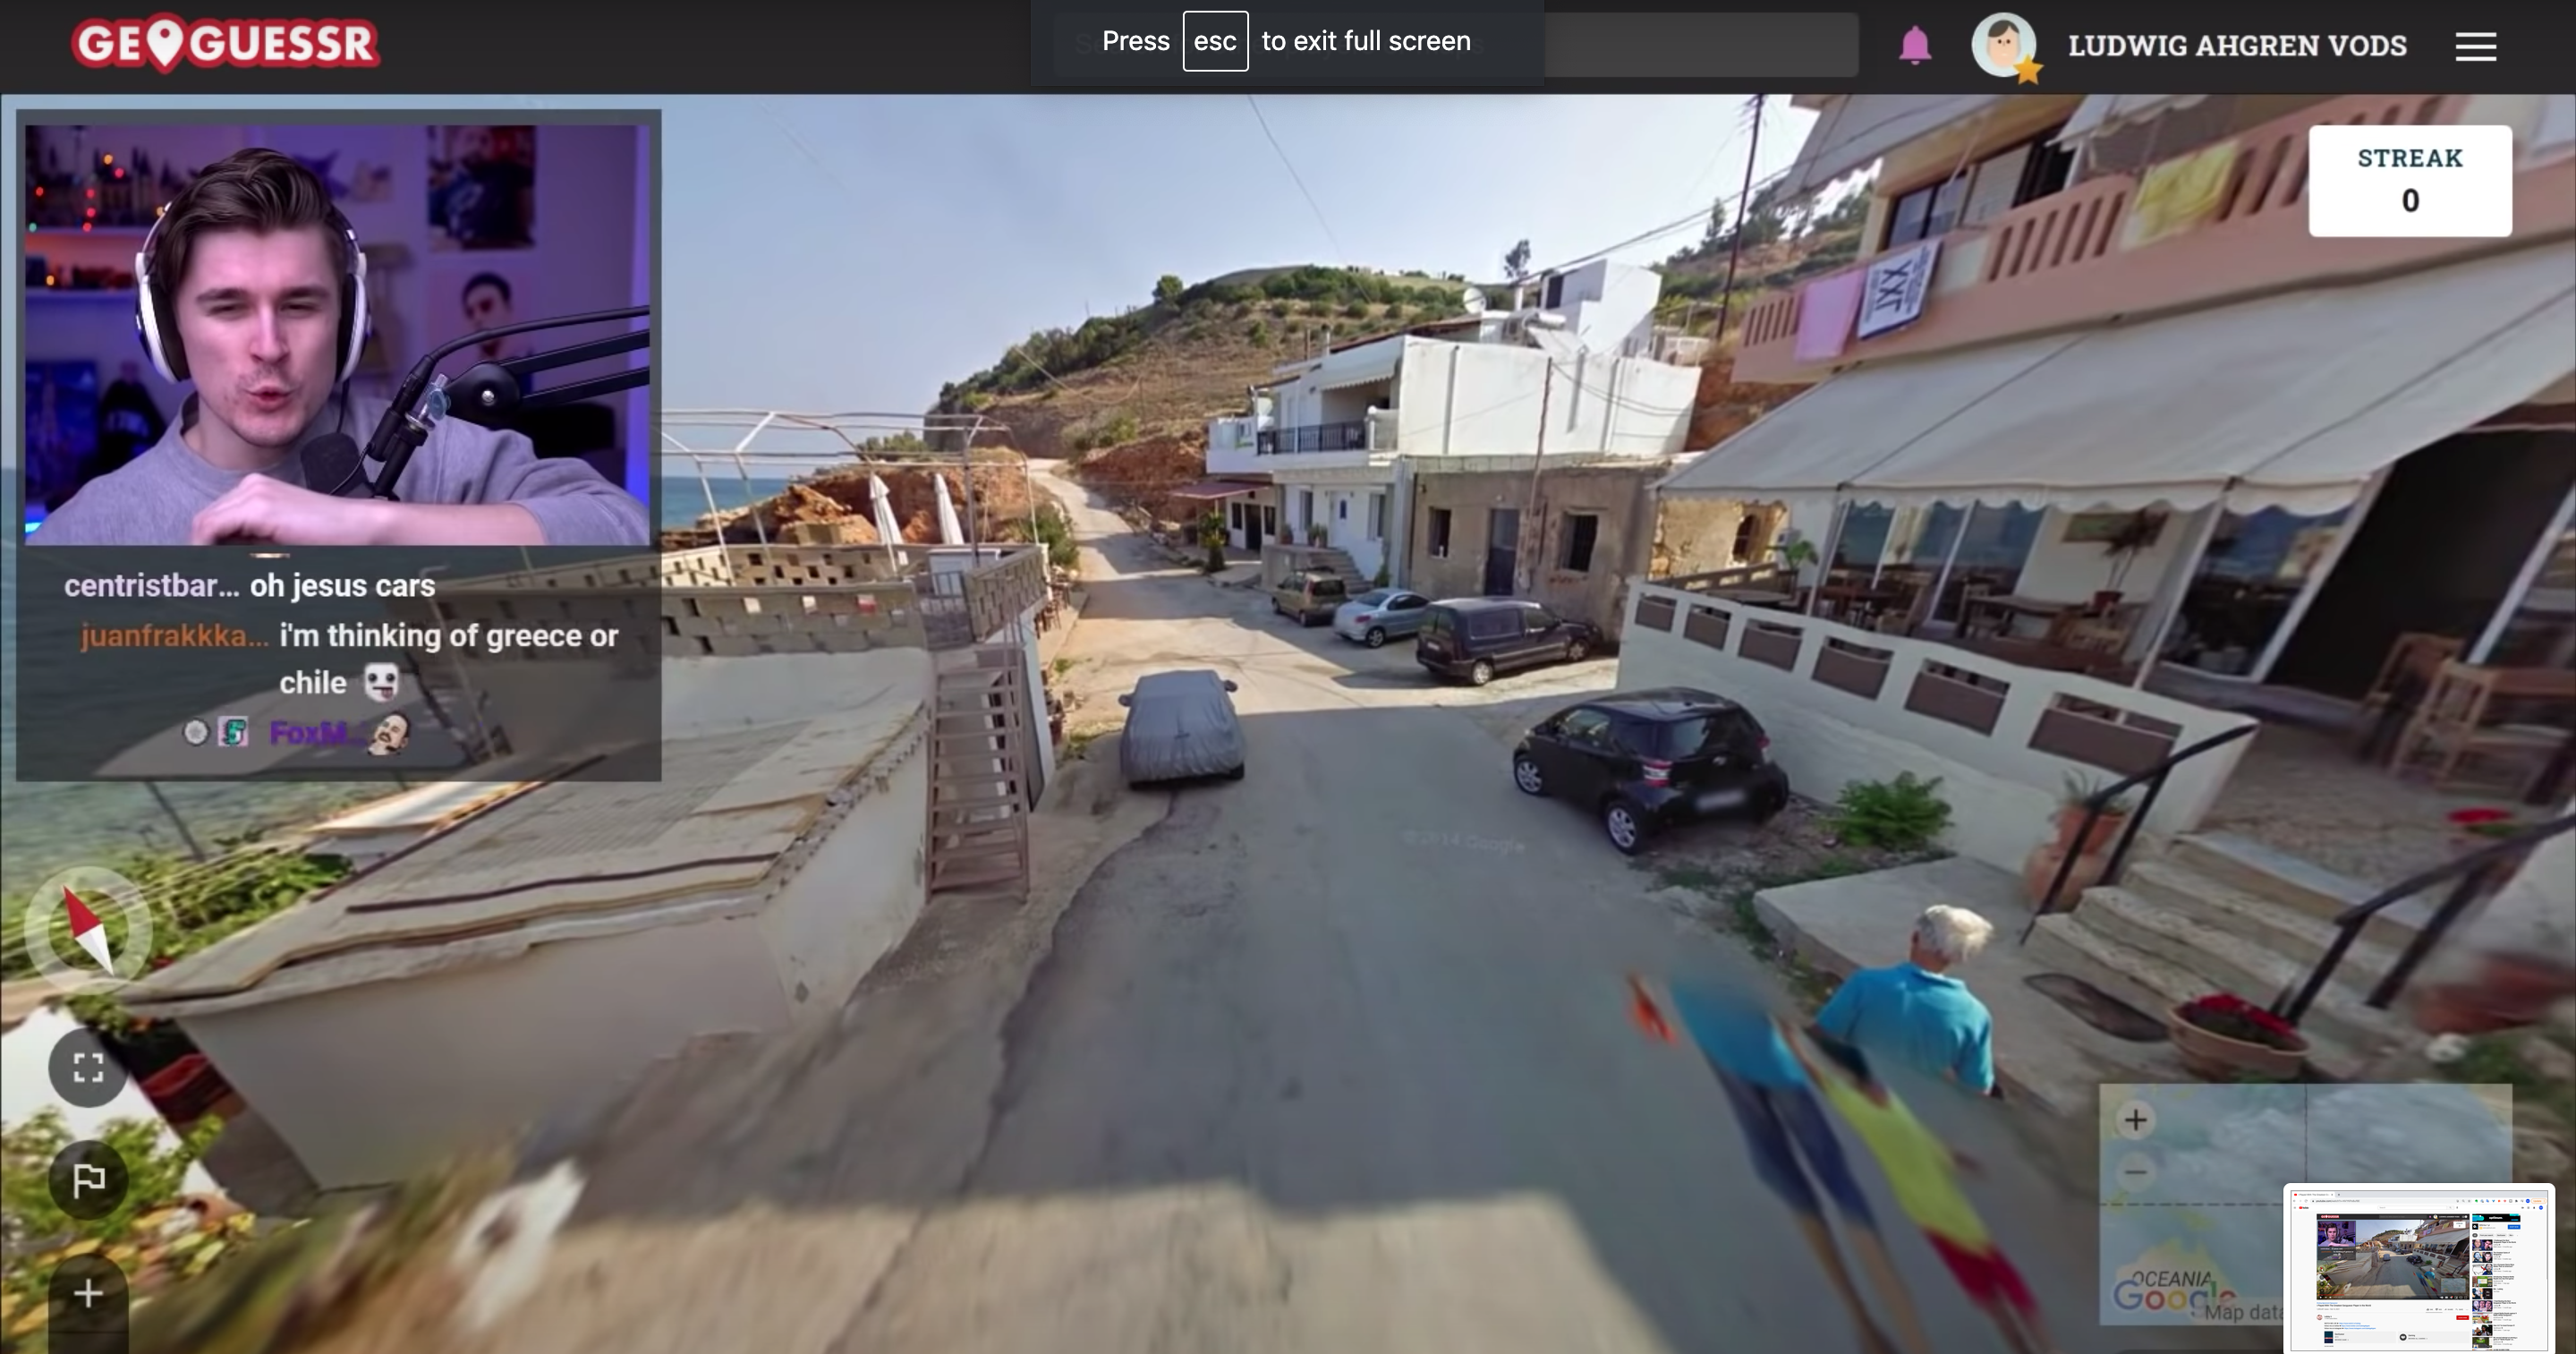 GeoGuessr Game Uses Street View to Create a Geographical Puzzle